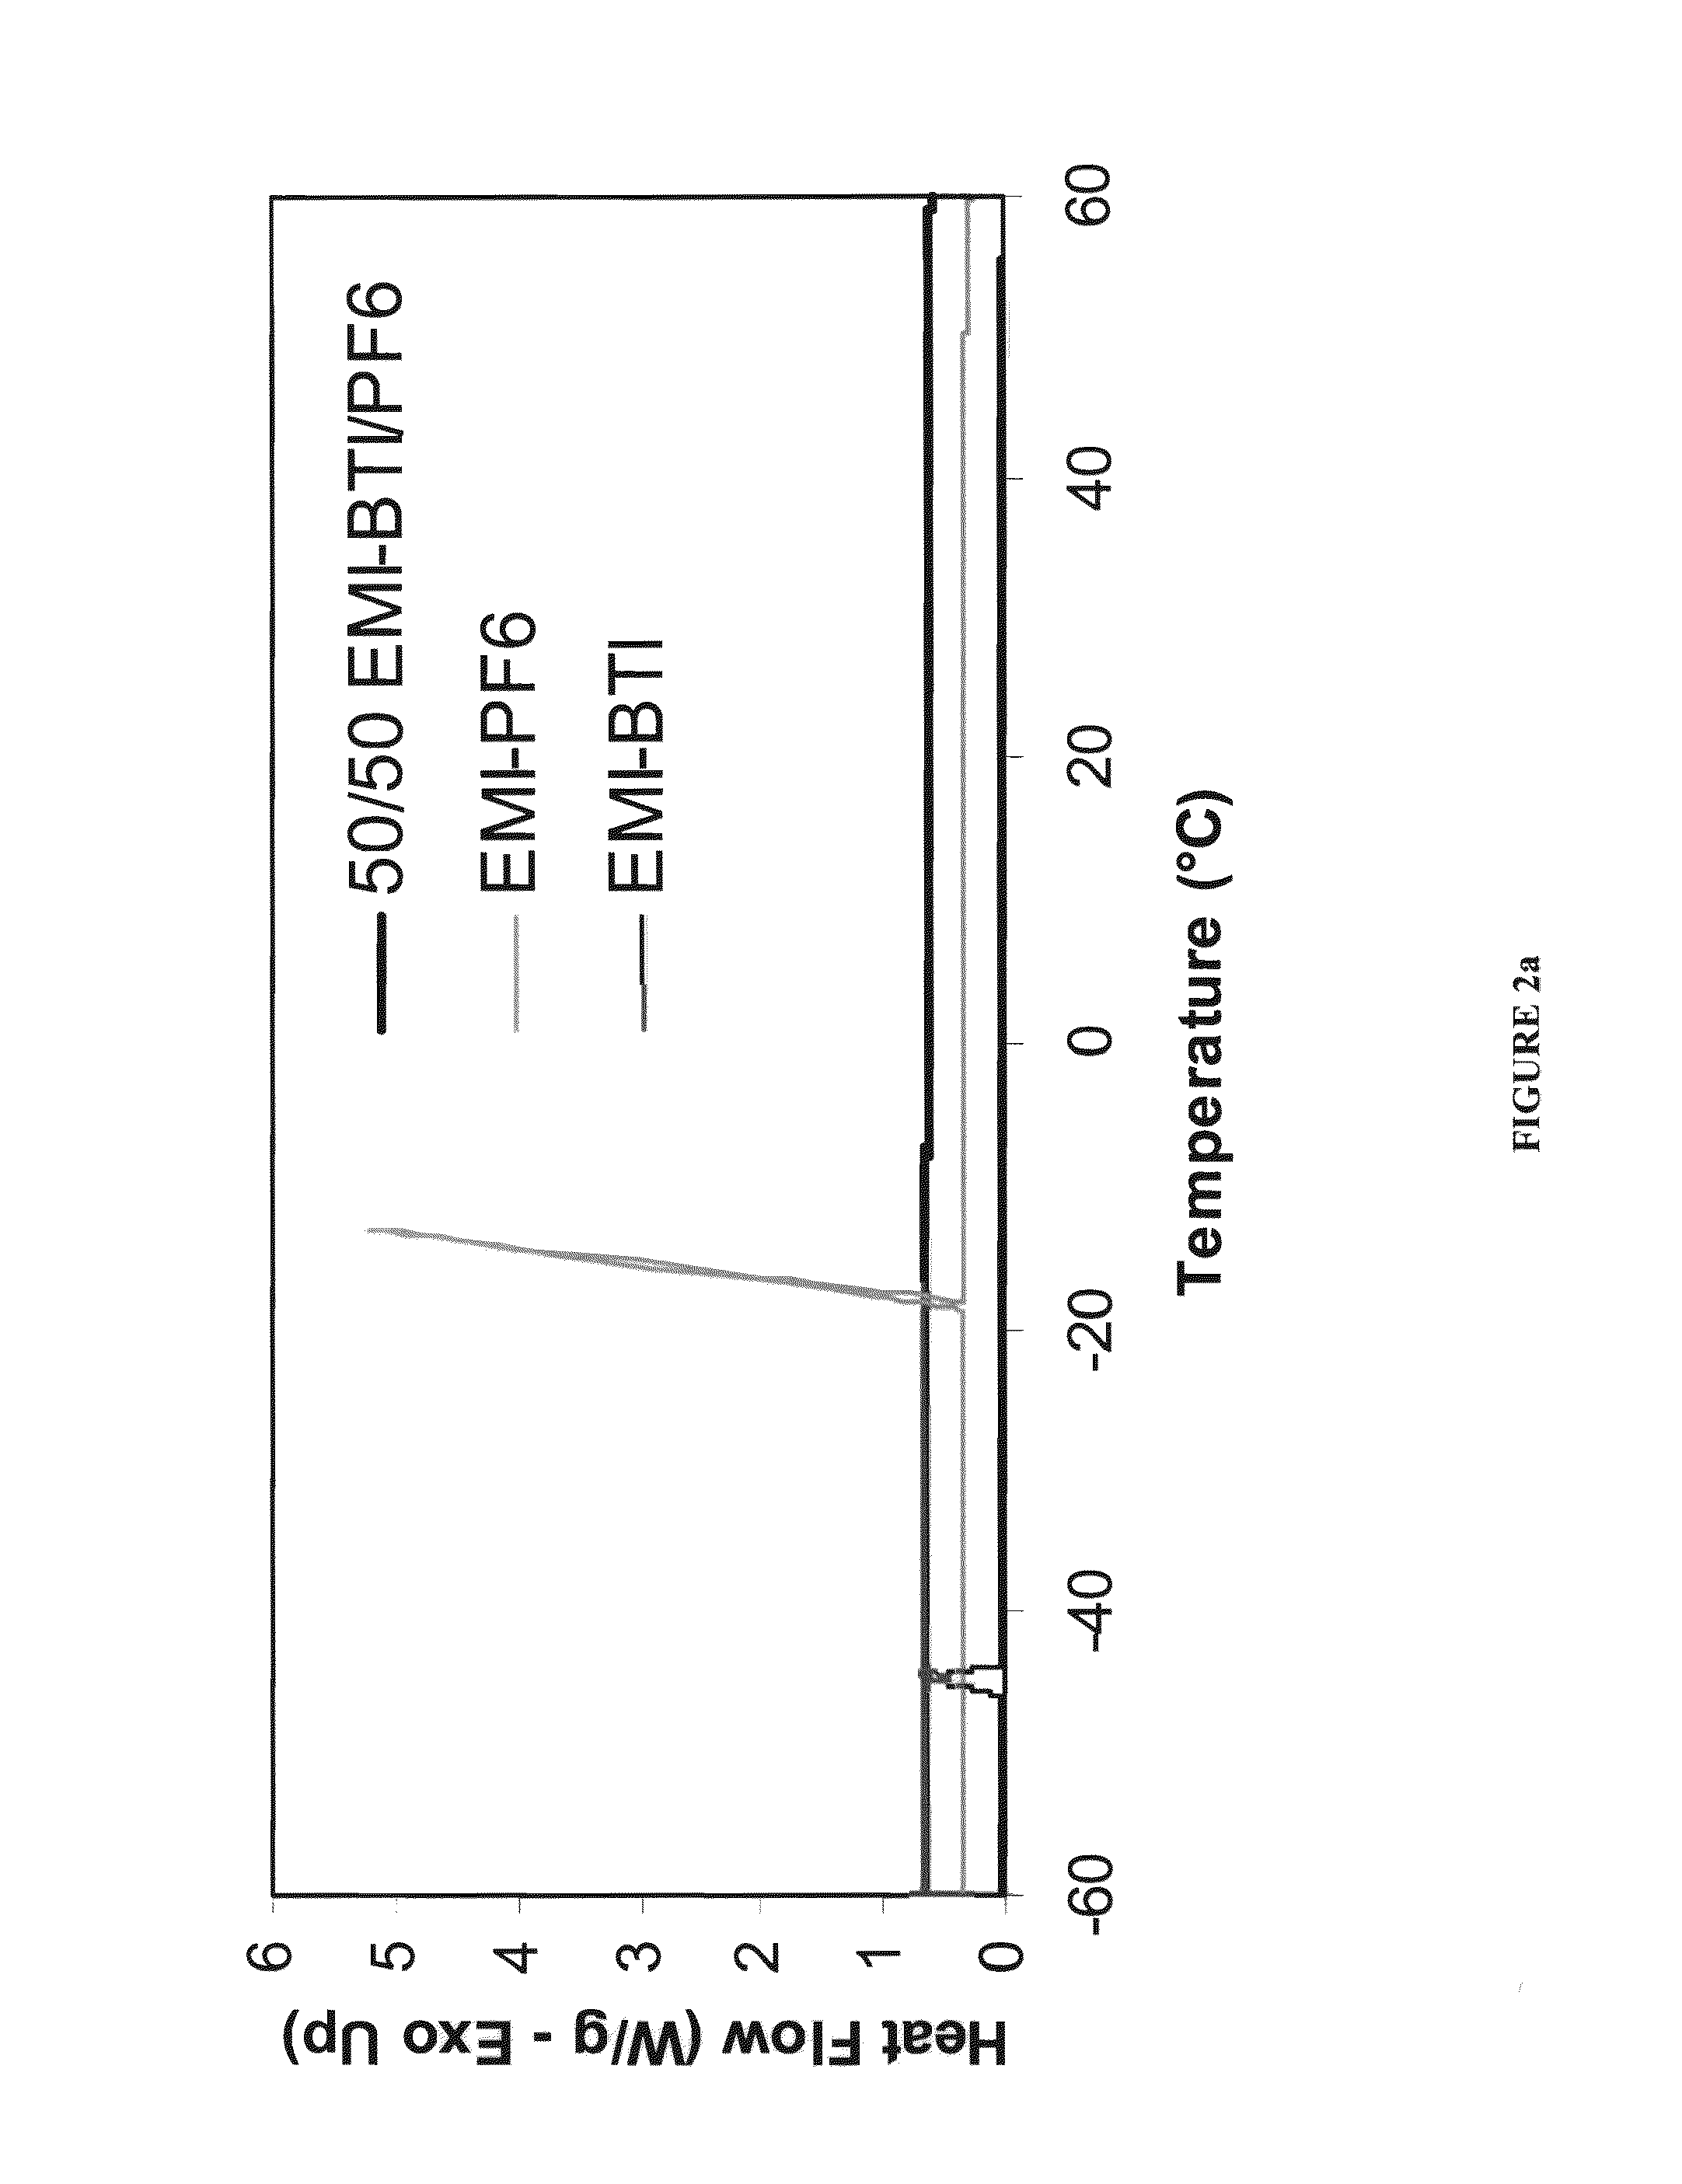 Electroactive polymer based supercapacitors including a cathode having BBL or Pry-BBL